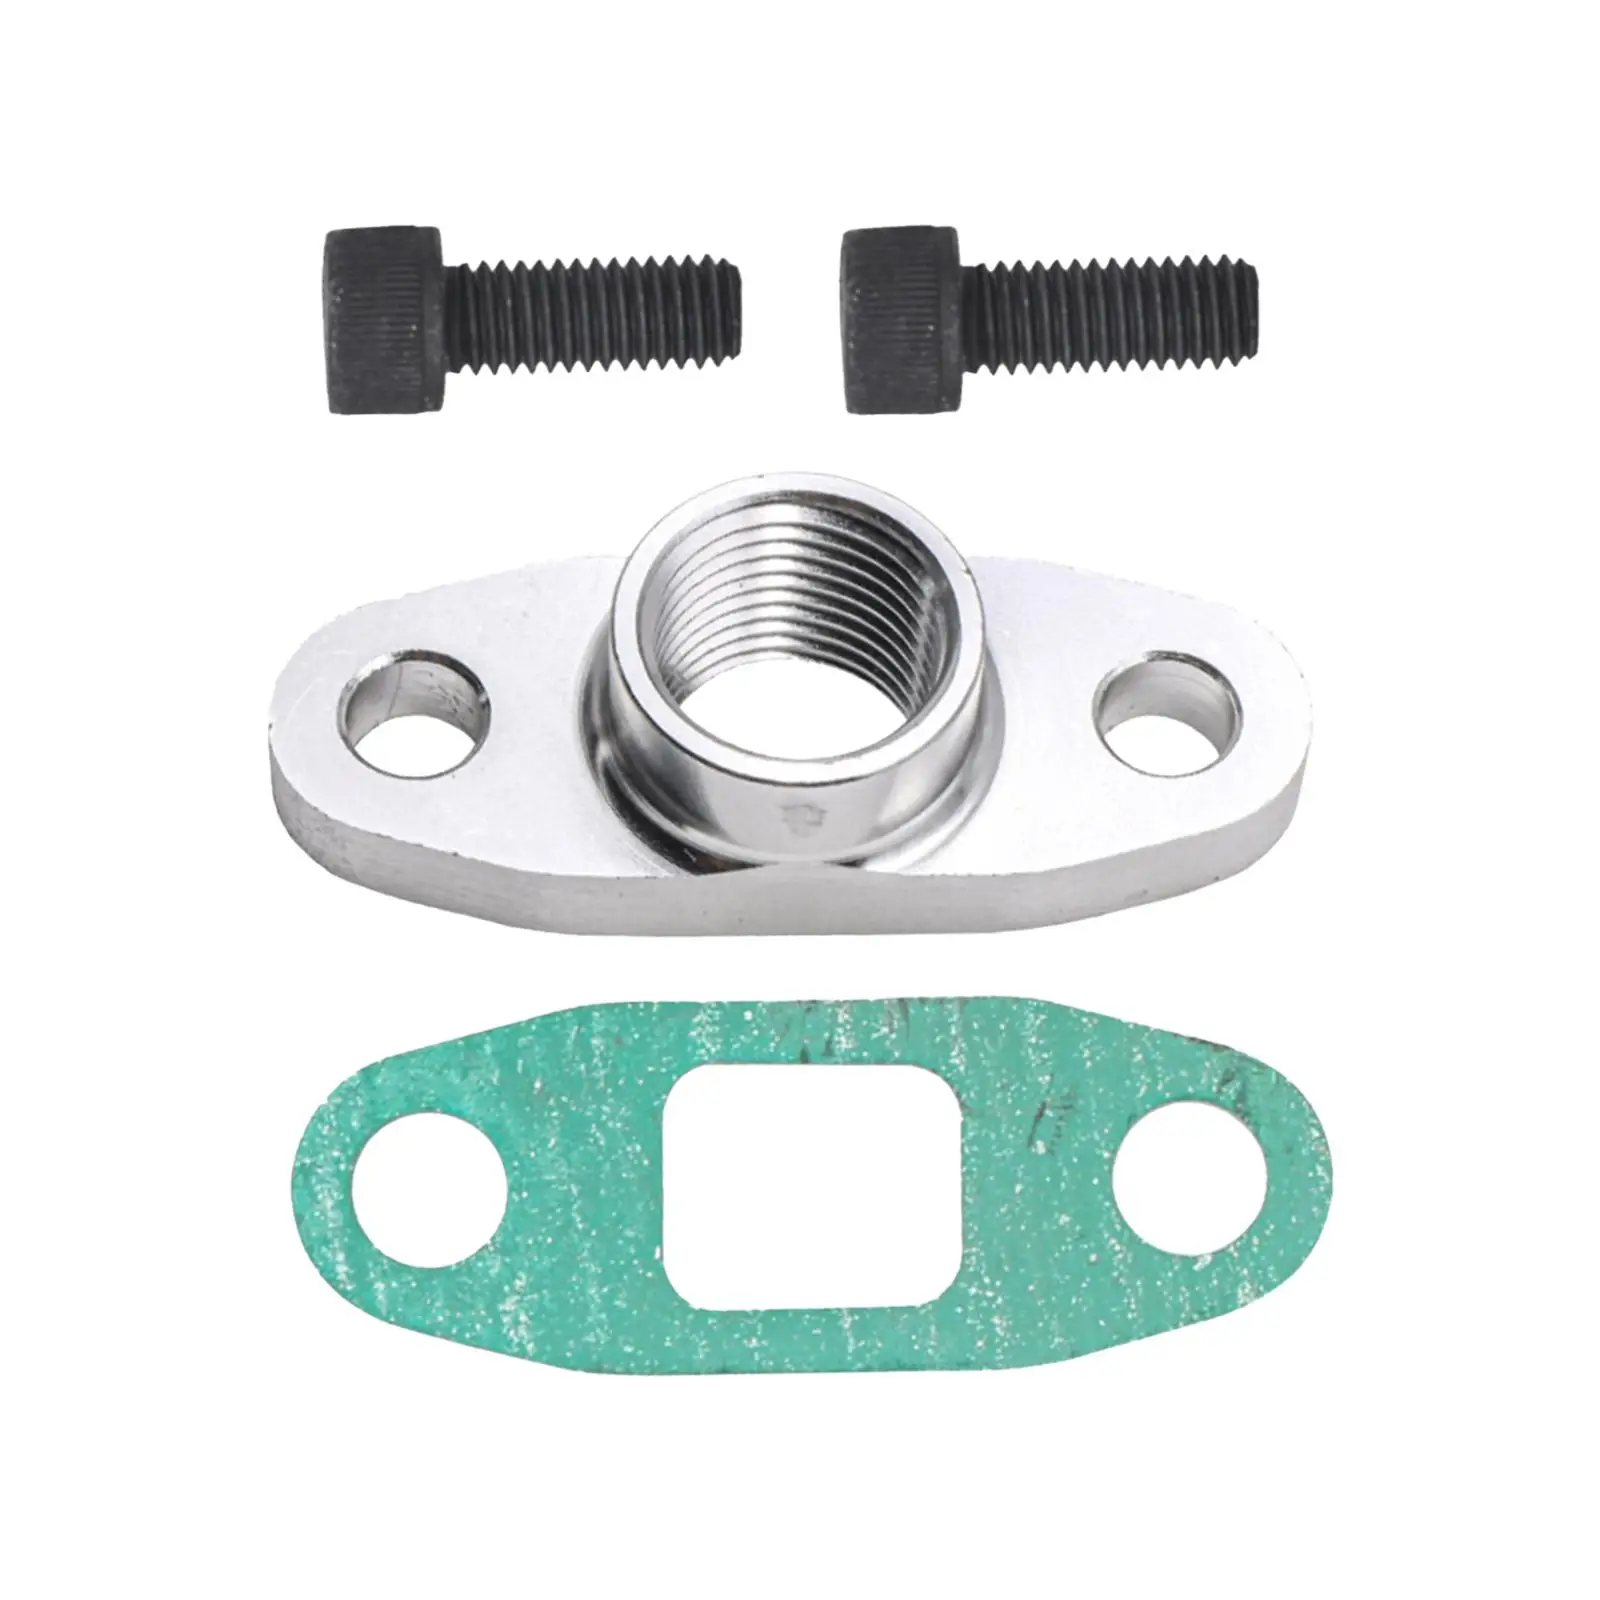 Oil Drain Outlet Flange Gasket Adapter Set with Gasket Accessory Aluminum Alloy 1/2